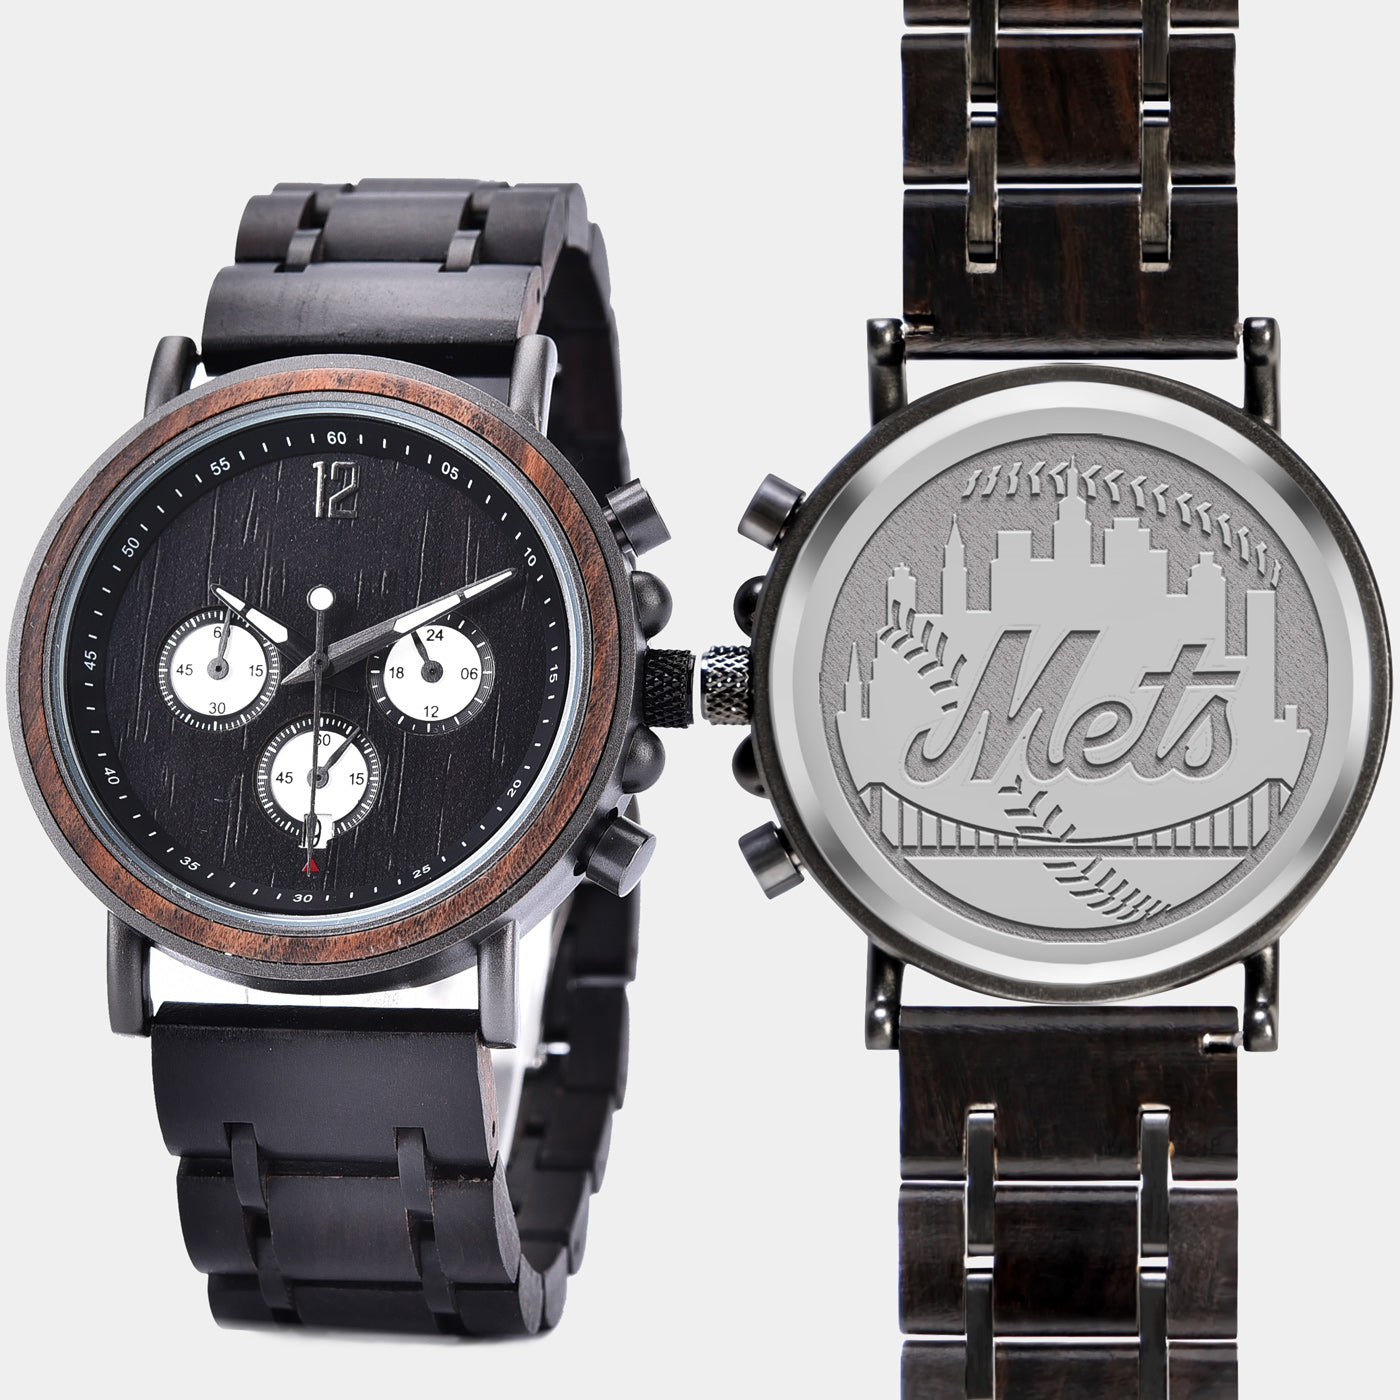 New York Mets Mens Wrist Watch  - Personalized New York Mets Mens Watches - Custom Gifts For Him, Birthday Gifts, Gift For Dad - Best 2022 New York Mets Christmas Gifts - Black 45mm MLB Wood Watch